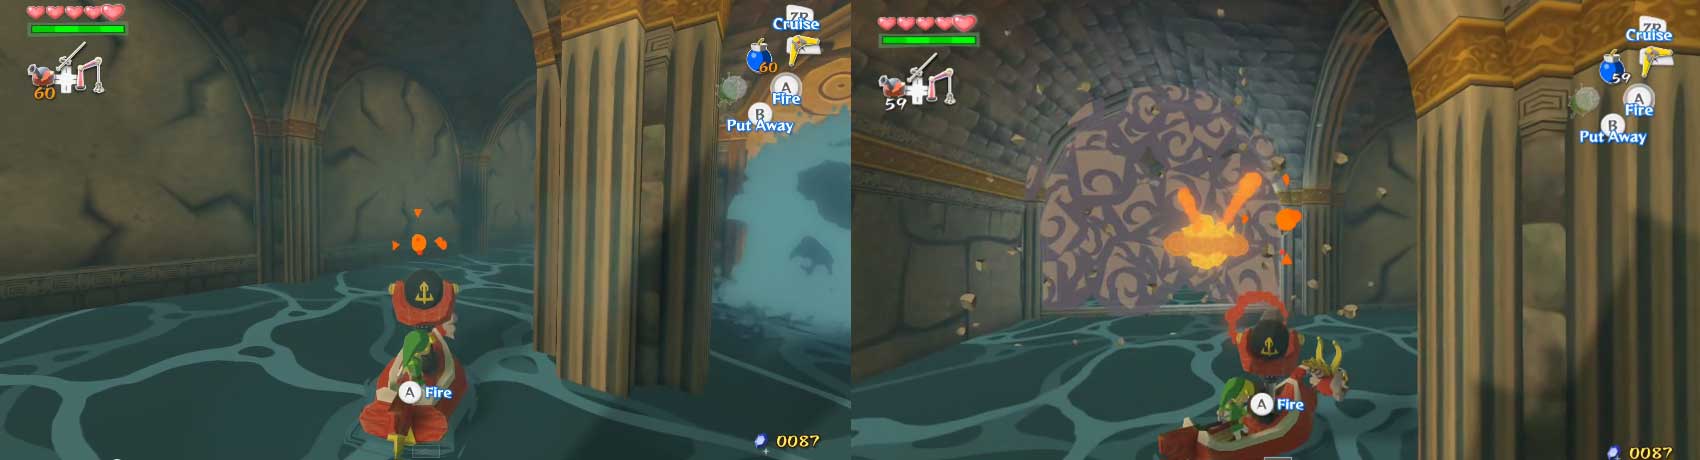 Equip the Bombs and use the boat's cannon to shoot Bombs at the wall sections. If the hit is good, the wall section will break, revealing a hole to another section.